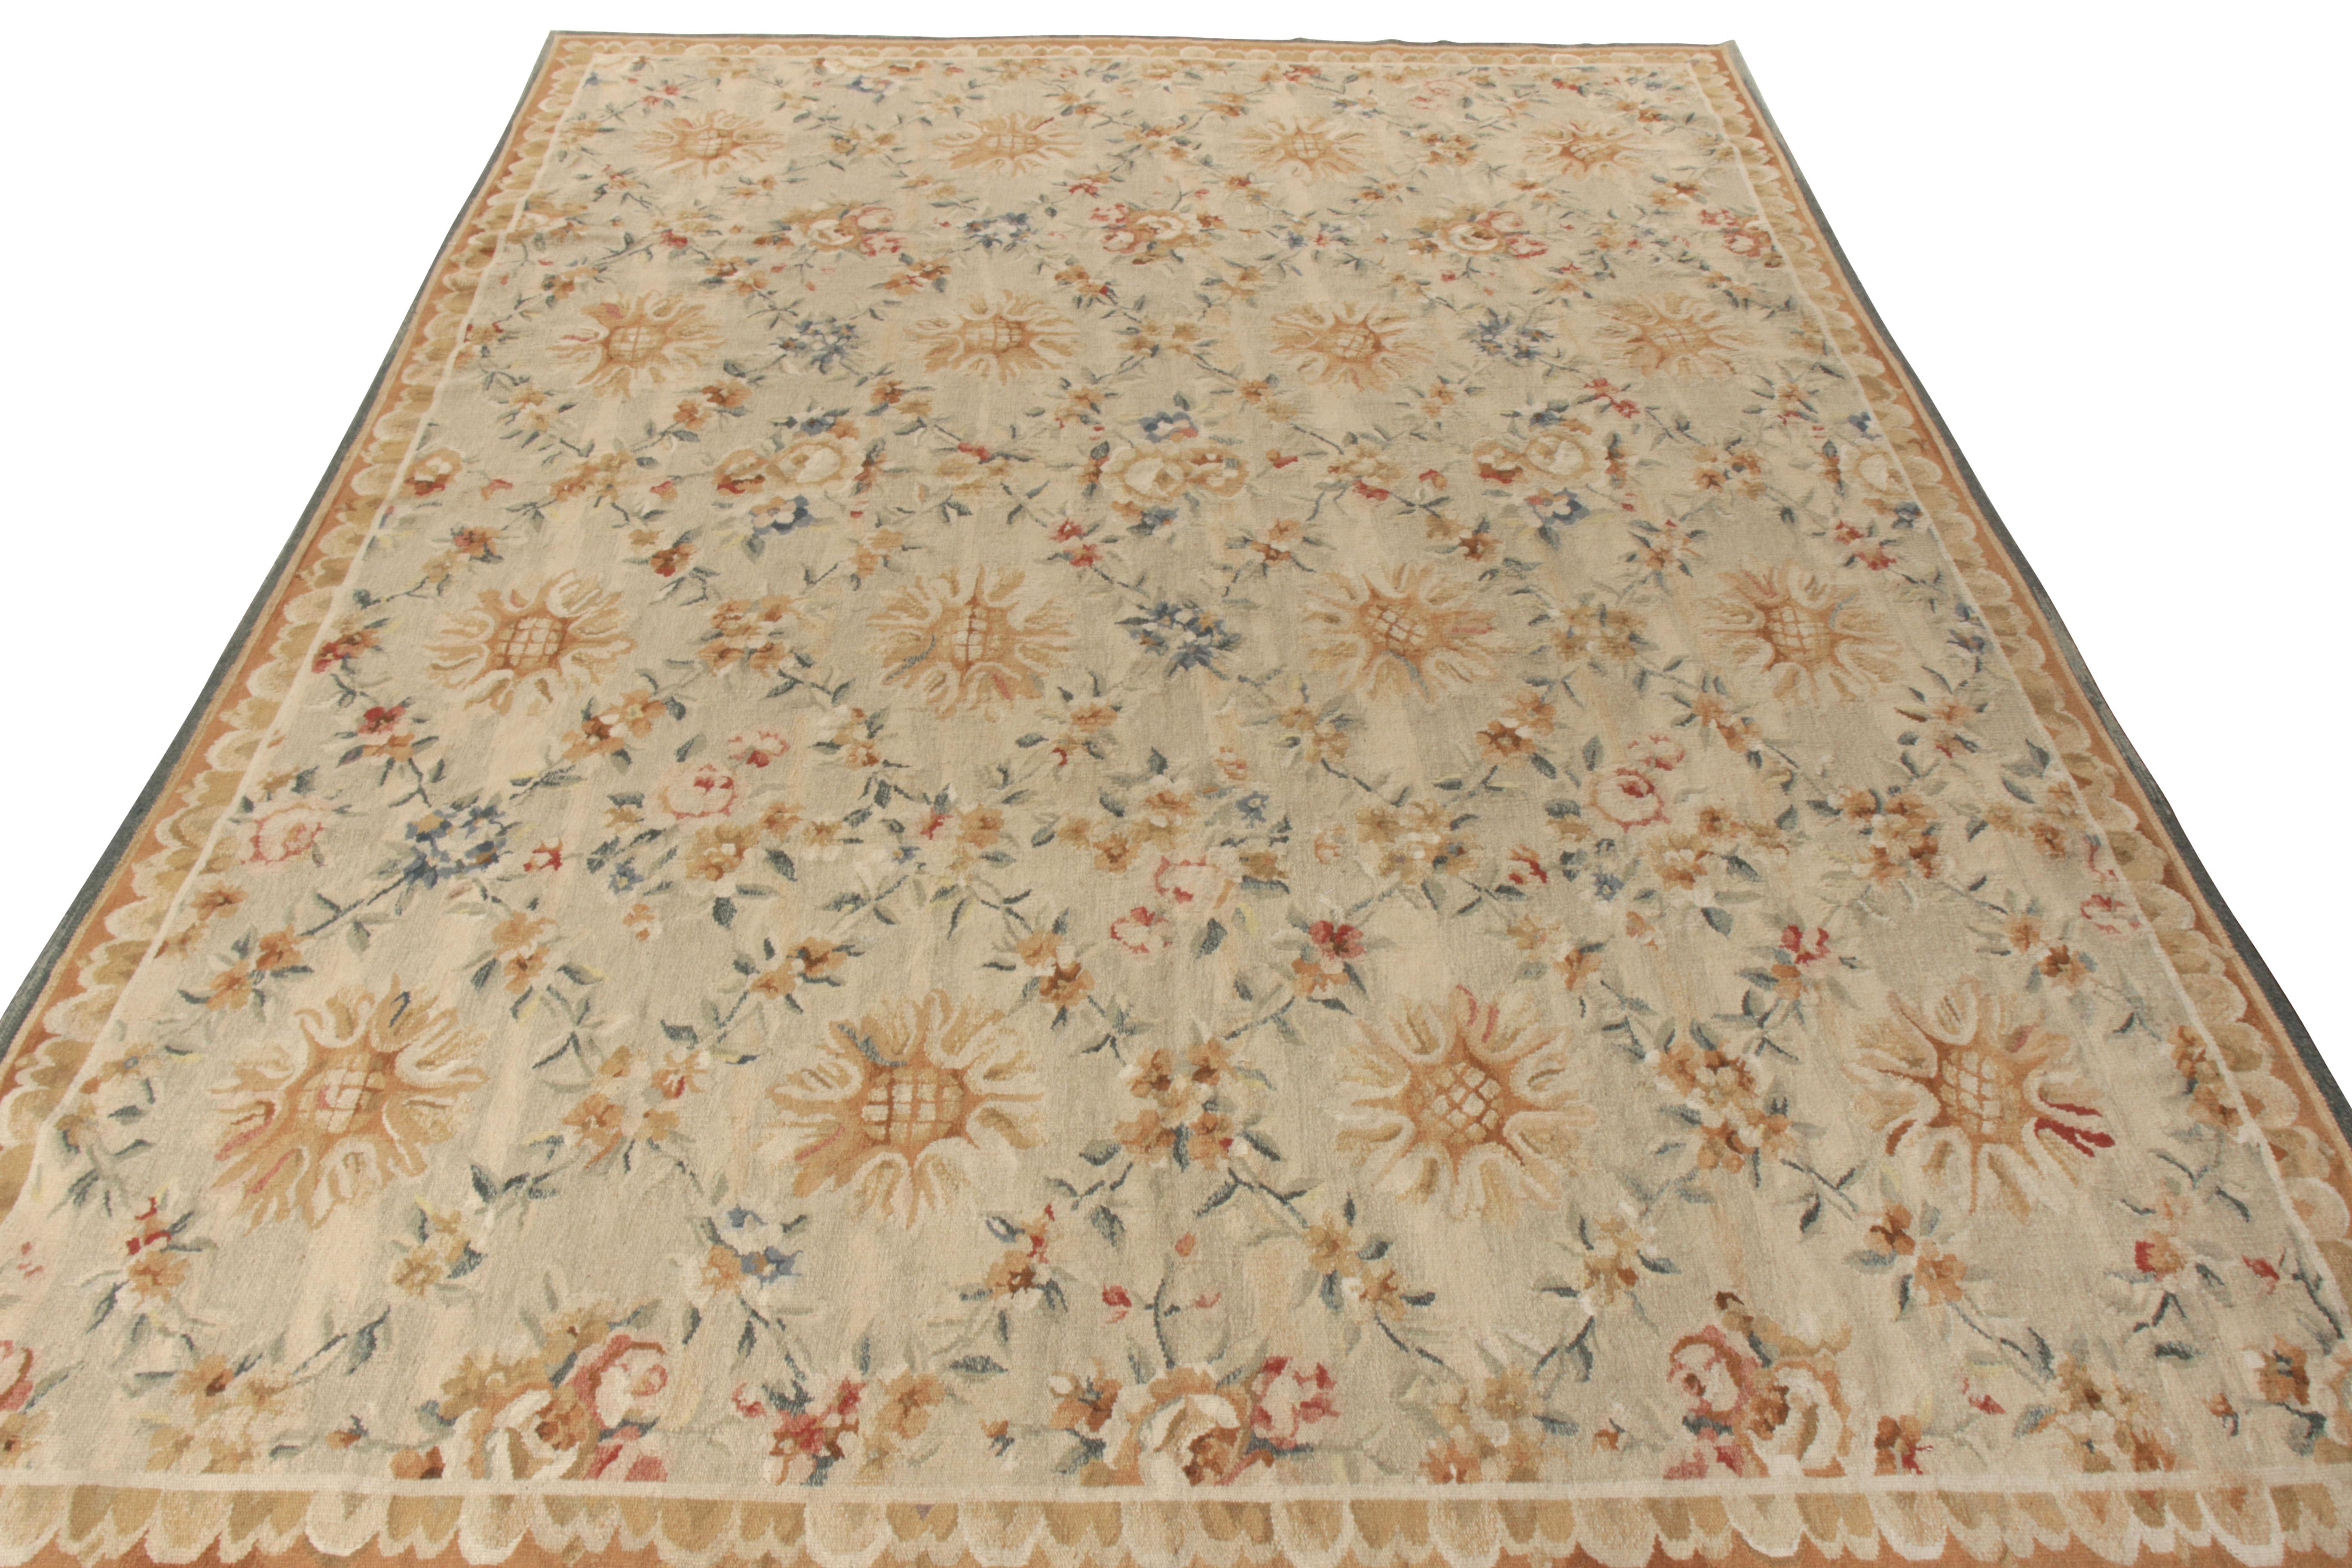 Rug & Kilim pays tribute to the celebrated French Aubusson style through this 9x13 flat weave rug from its coveted European Collection. Hand woven in wool with the finest quality yarn, this 18th century inspired piece further reflects a distinctive